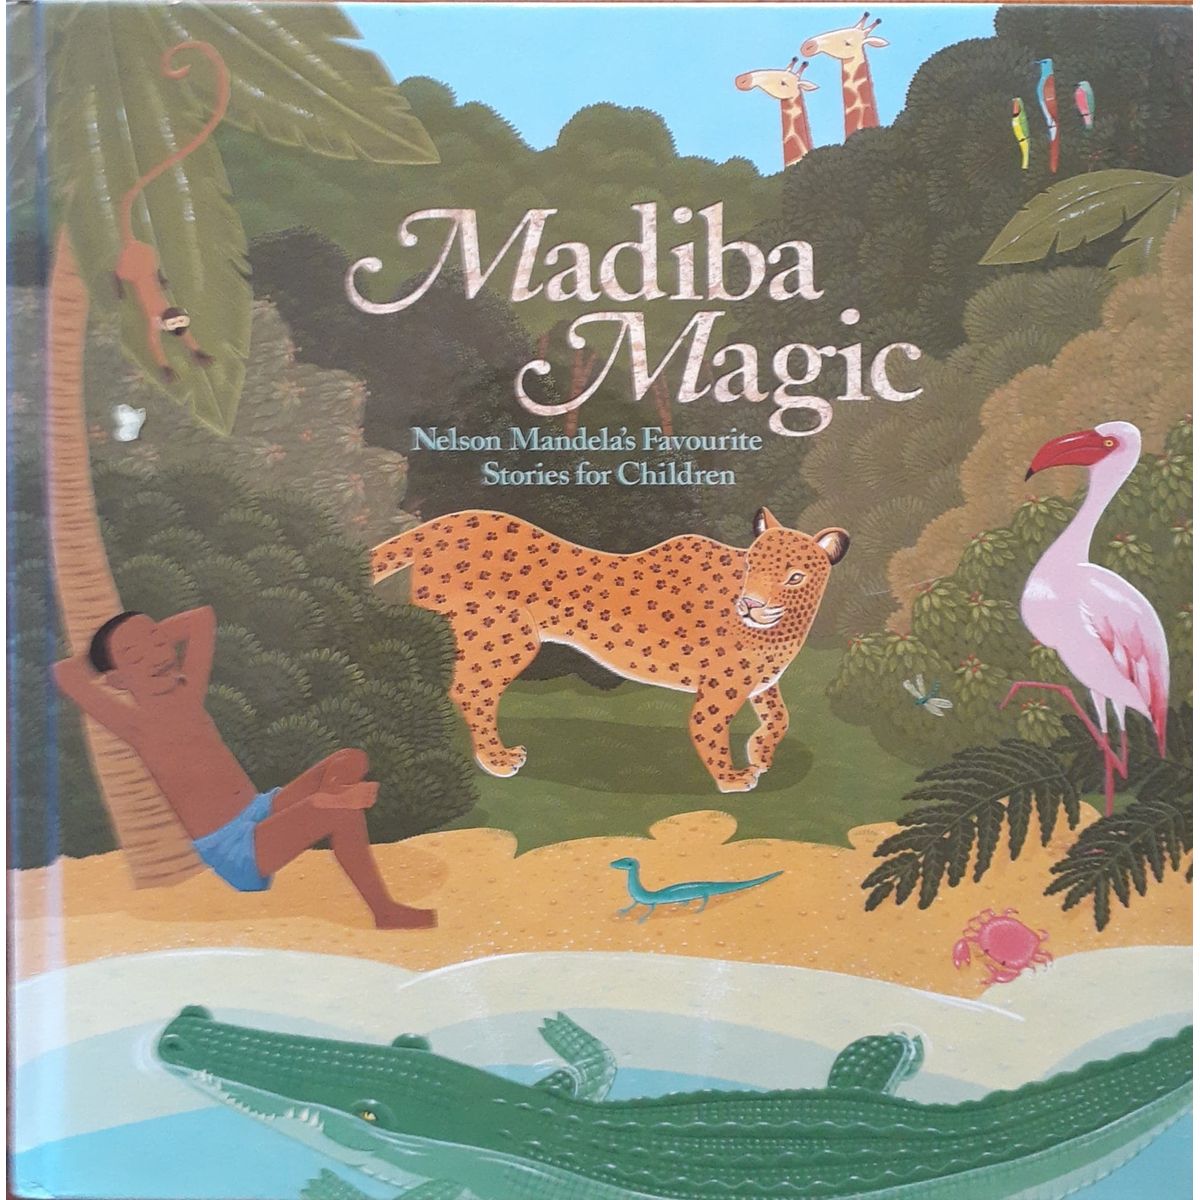 ISBN: 9780624040736 / 0624040739 - Madiba Magic: Nelson Mandela's Favourite Stories for Children by Jack Cope, Alex D'Angelo, Geina Mhlope and Others [2002]